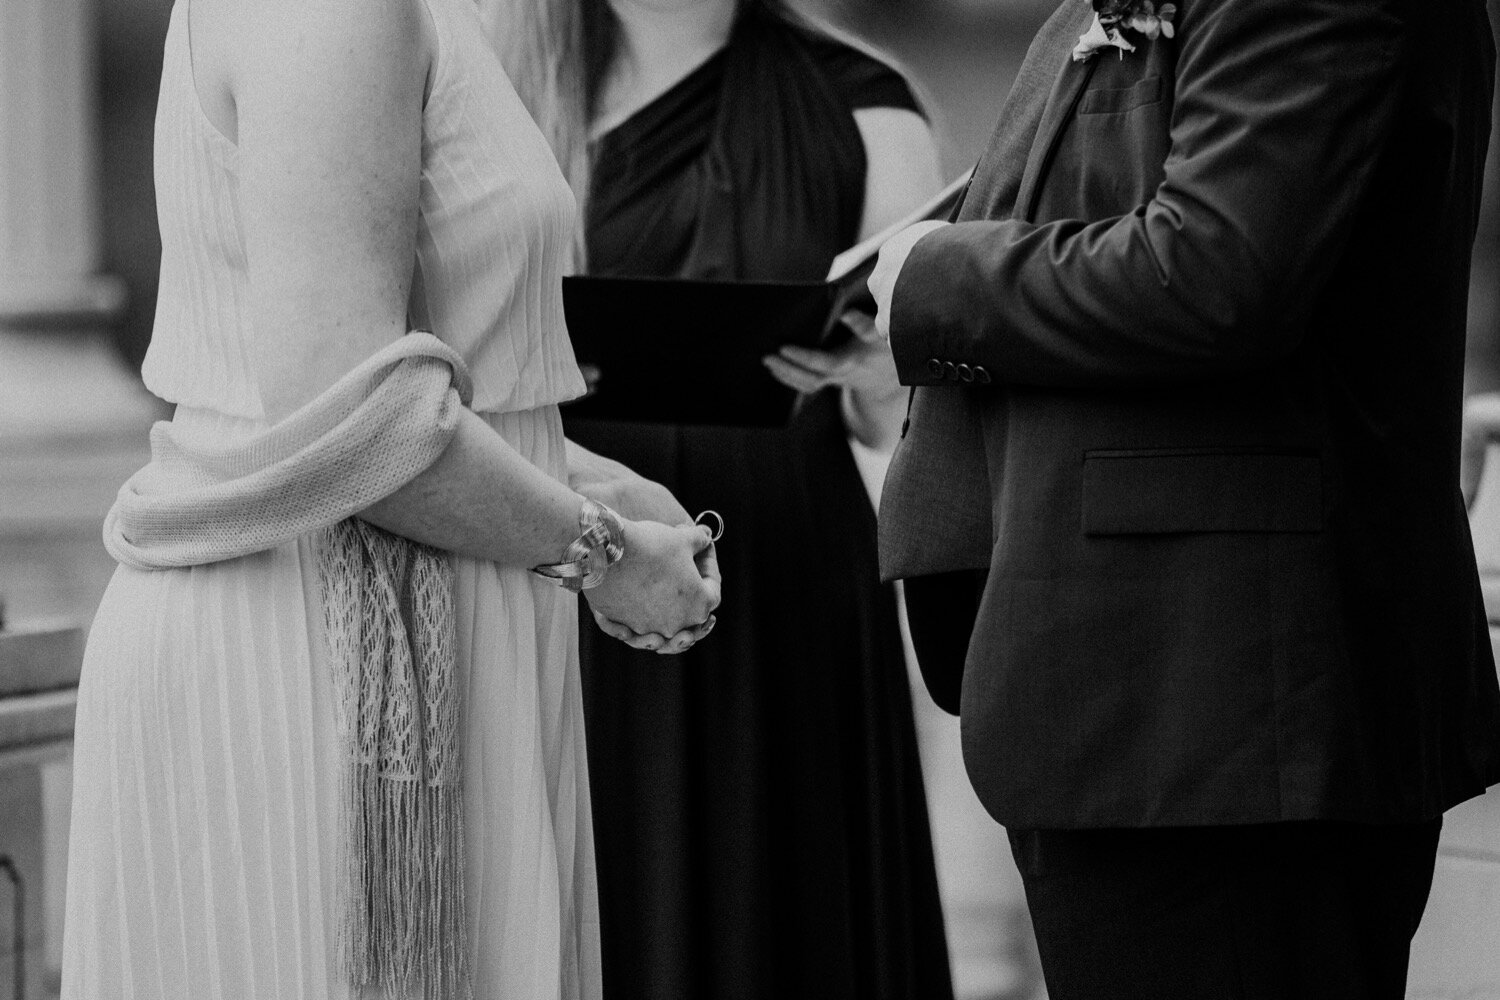 25_Maris&Lucas-130-2_Spring Elopement wedding at Belvoir Winery and Inn in Kansas City, Missouri photographed by Kelsey Diane Photography.jpg